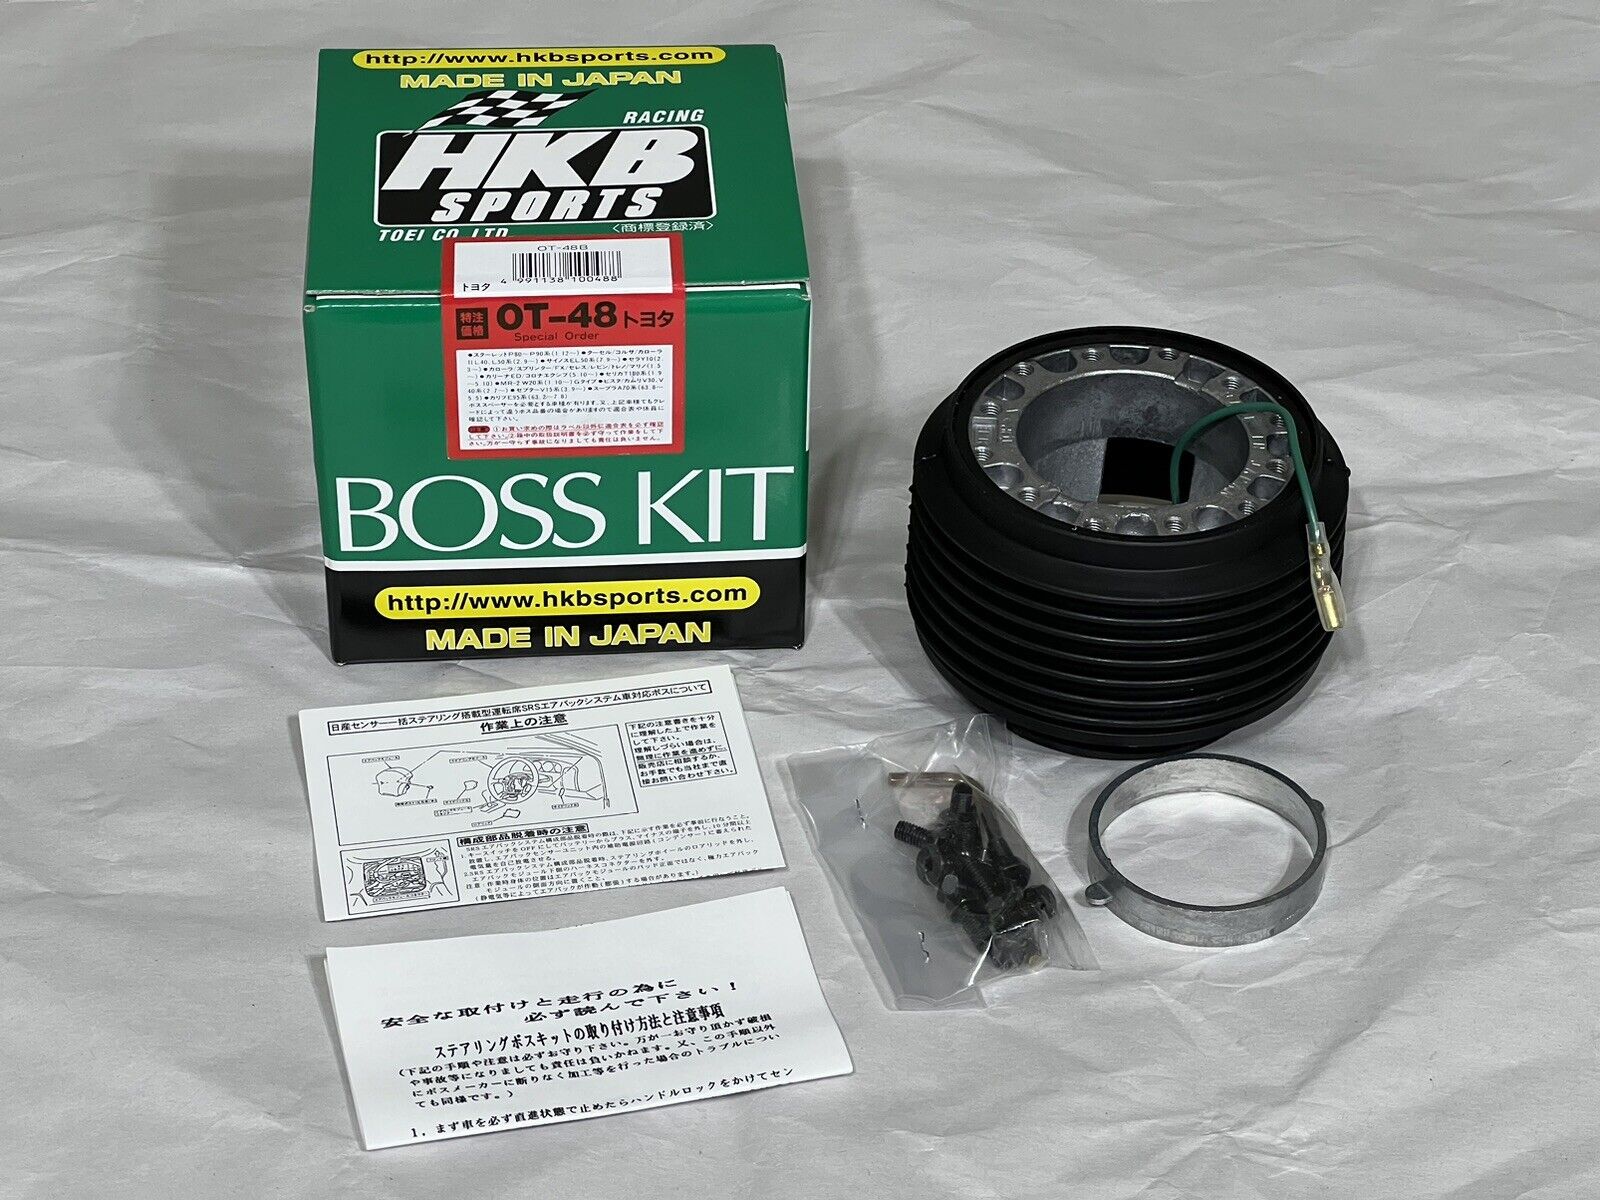 HKB SPORTS Steering Wheel Adapter Kit Boss for 96-99 Toyota Starlet Glanza S